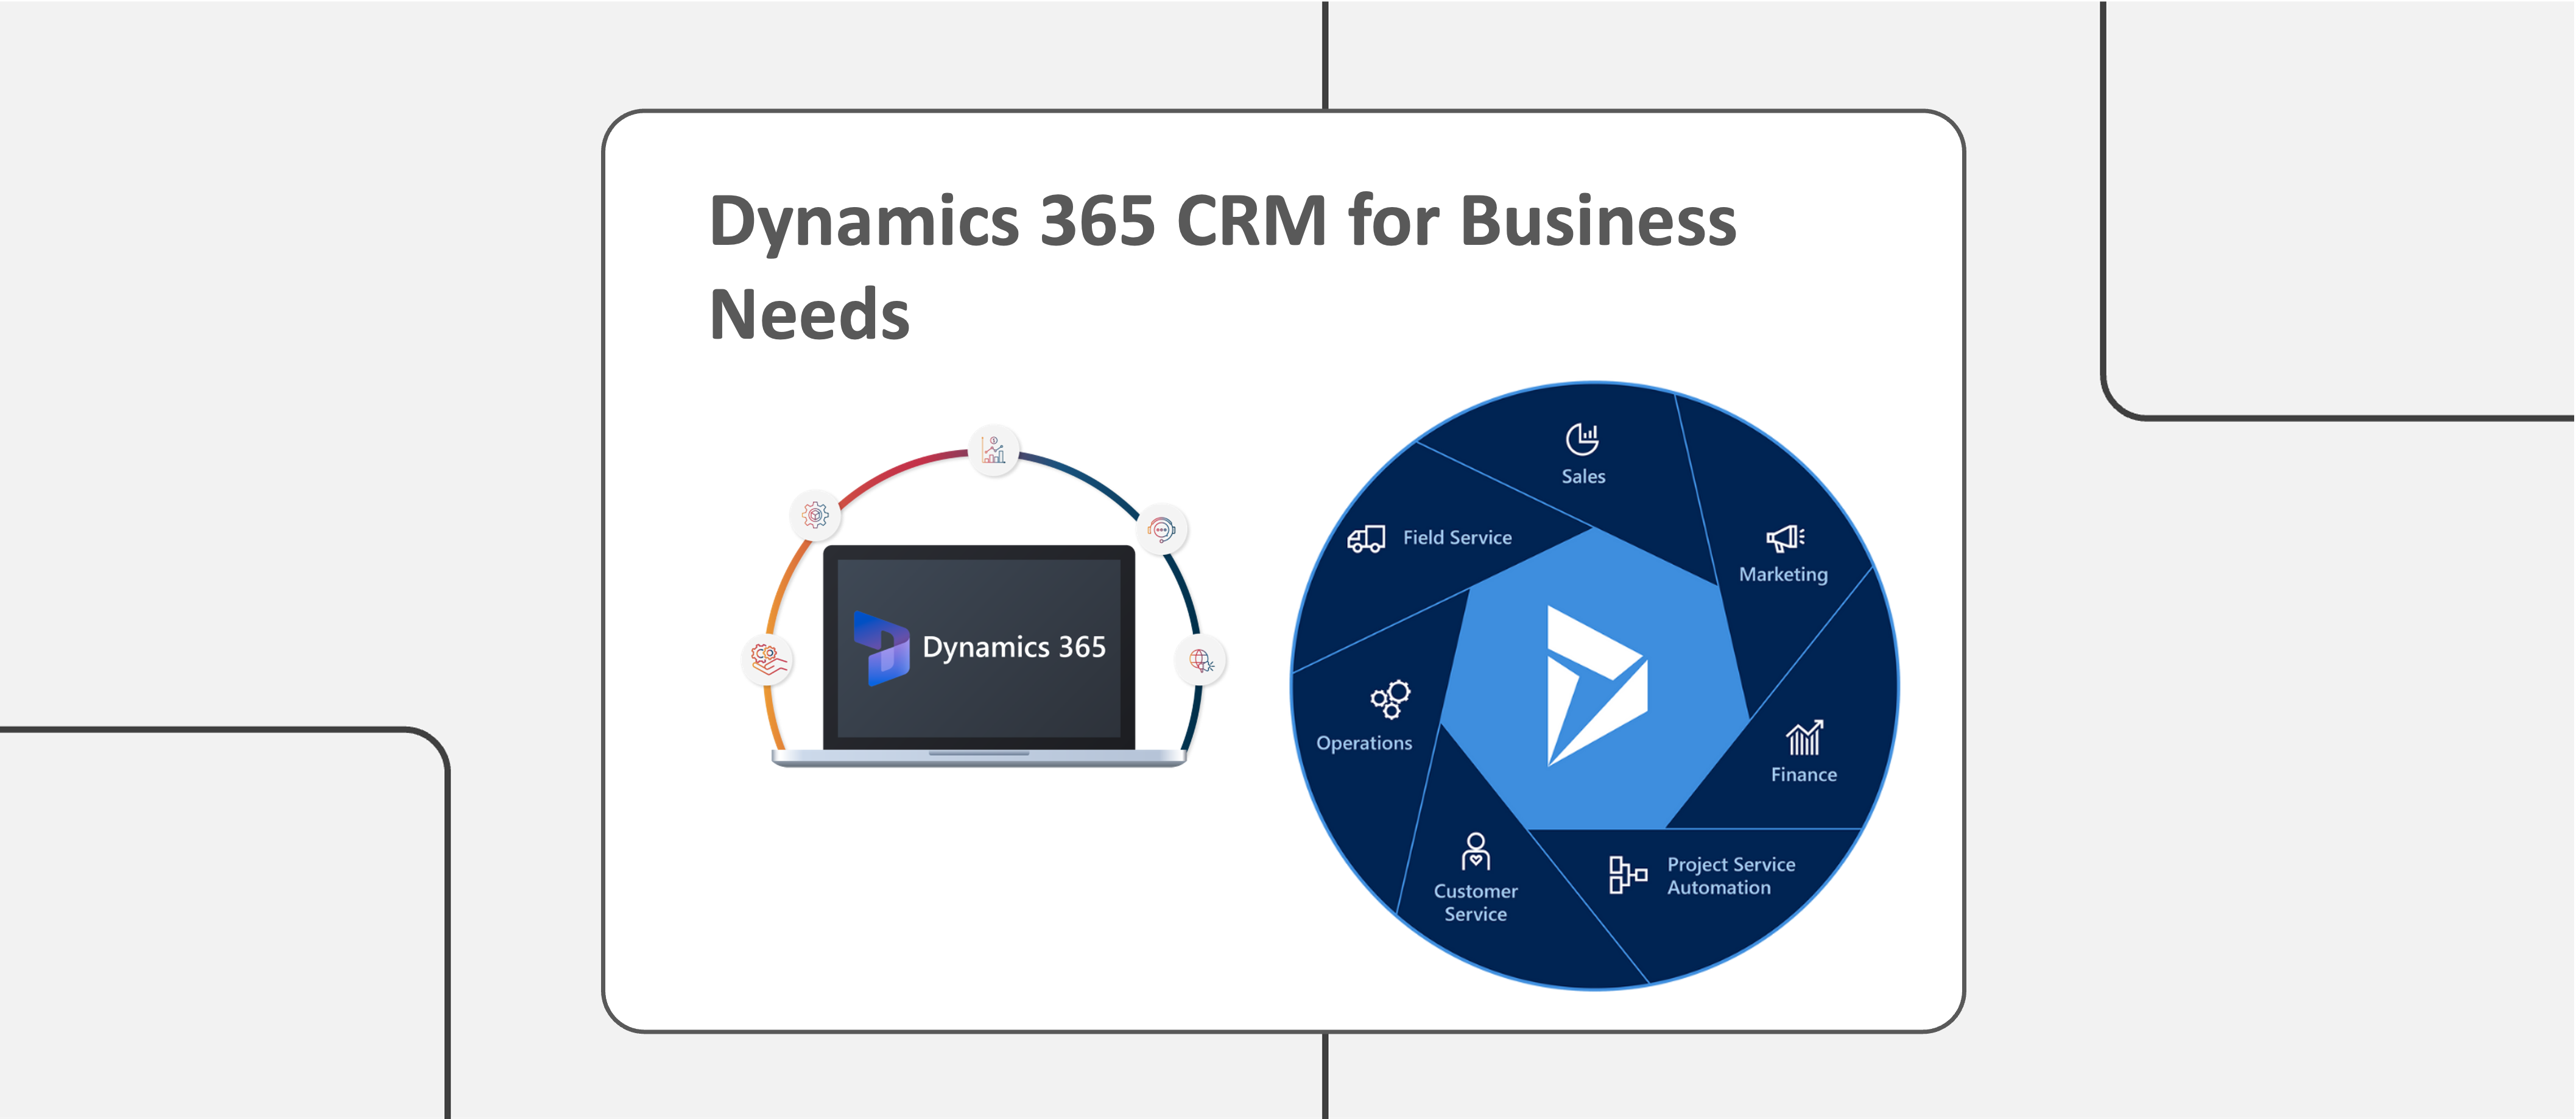 How Standard Software – Microsoft Dynamics 365 CRM can align with your company needs?